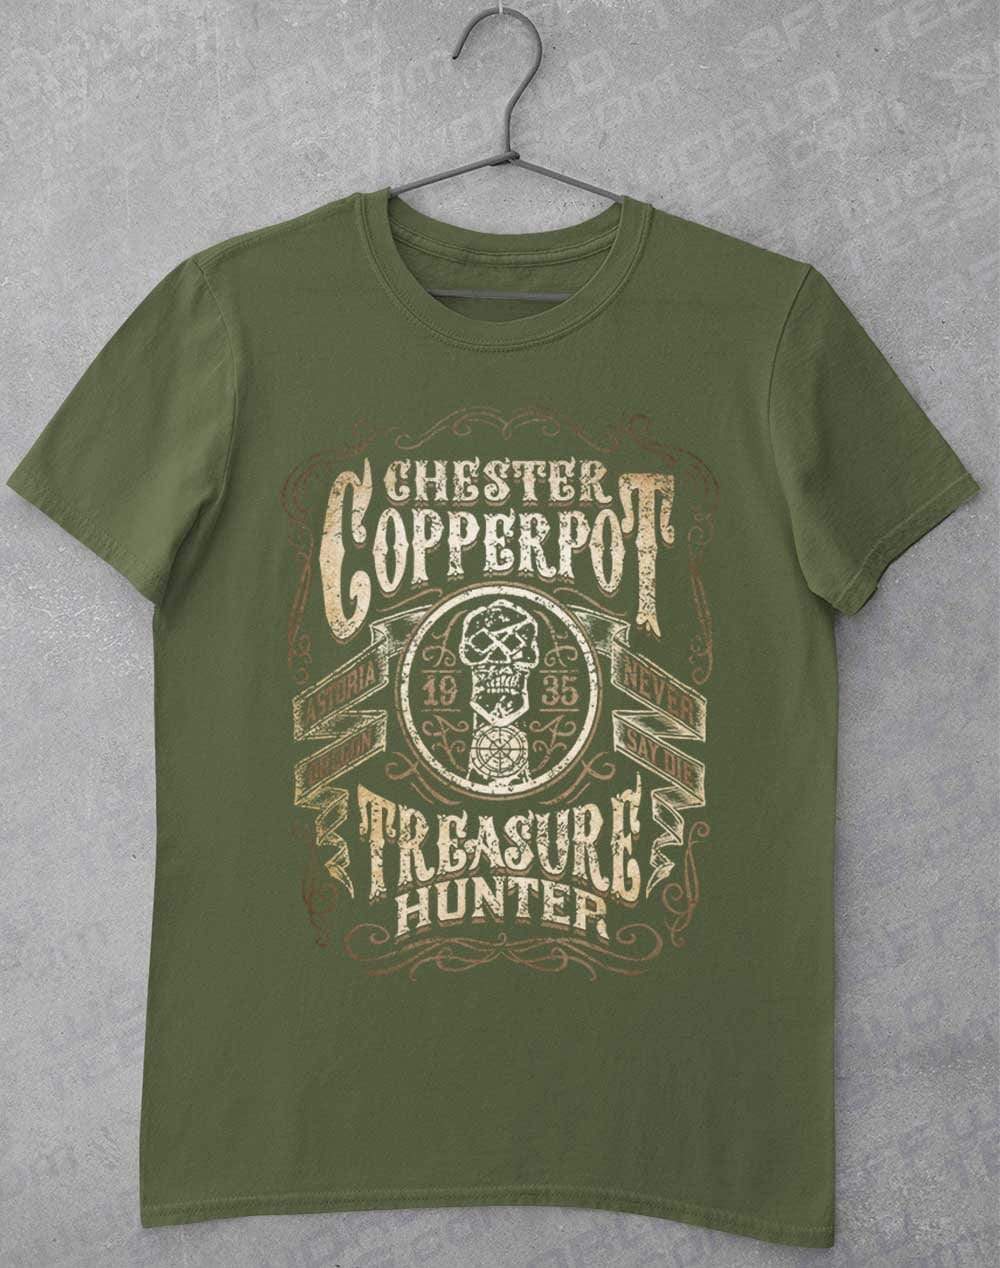 Chester Copperpot Treasure Hunter T-Shirt S / Military Green  - Off World Tees